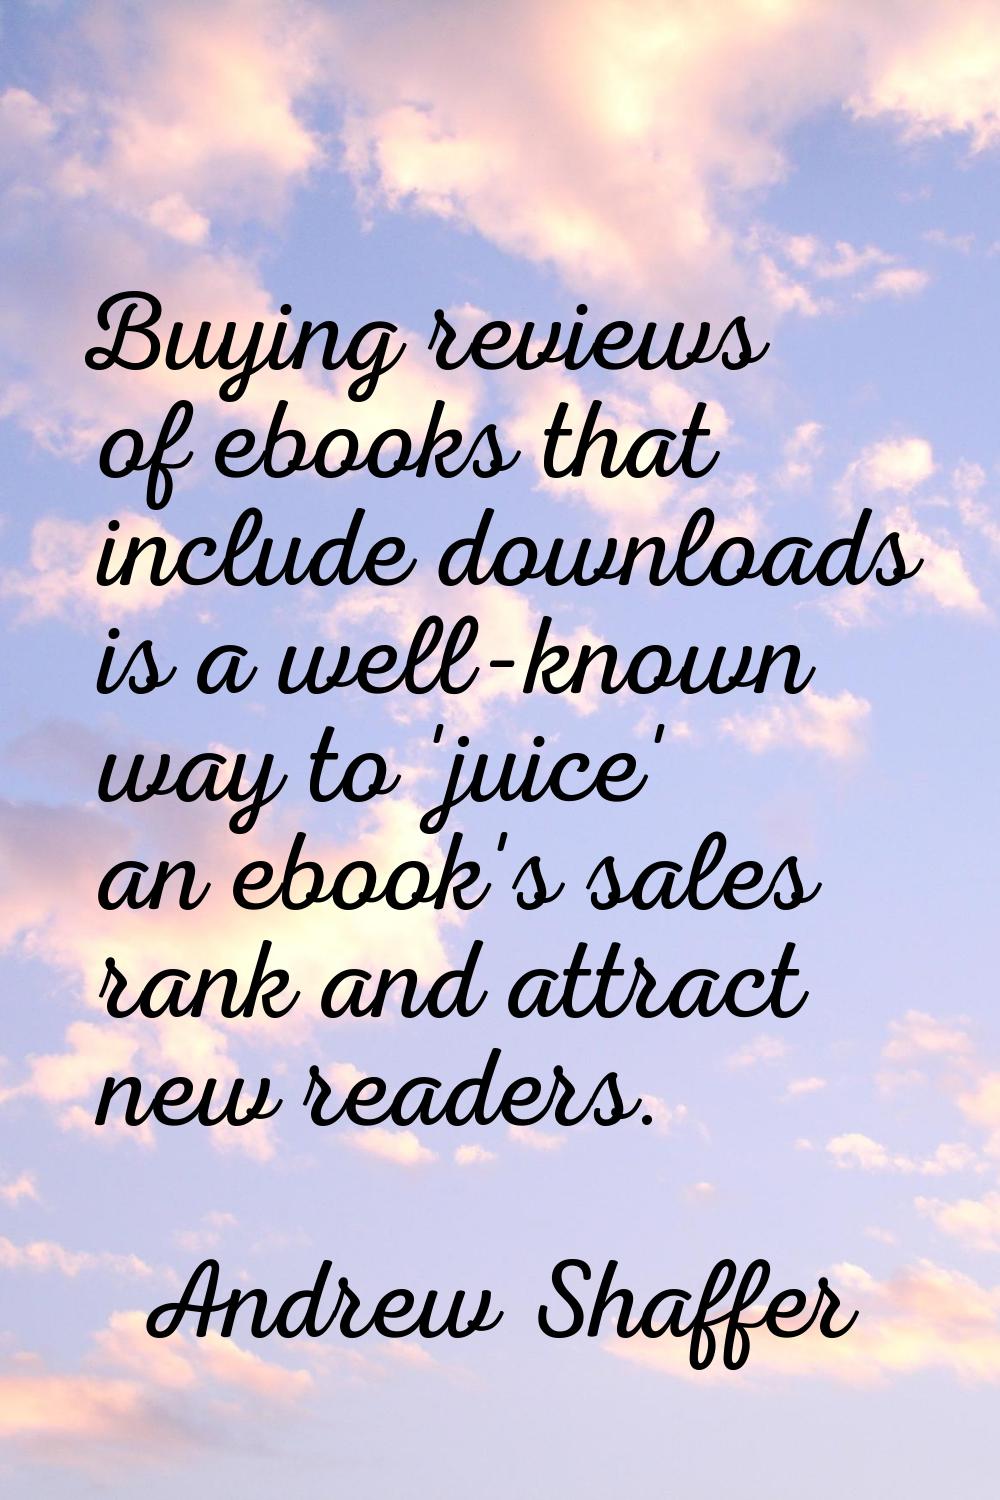 Buying reviews of ebooks that include downloads is a well-known way to 'juice' an ebook's sales ran